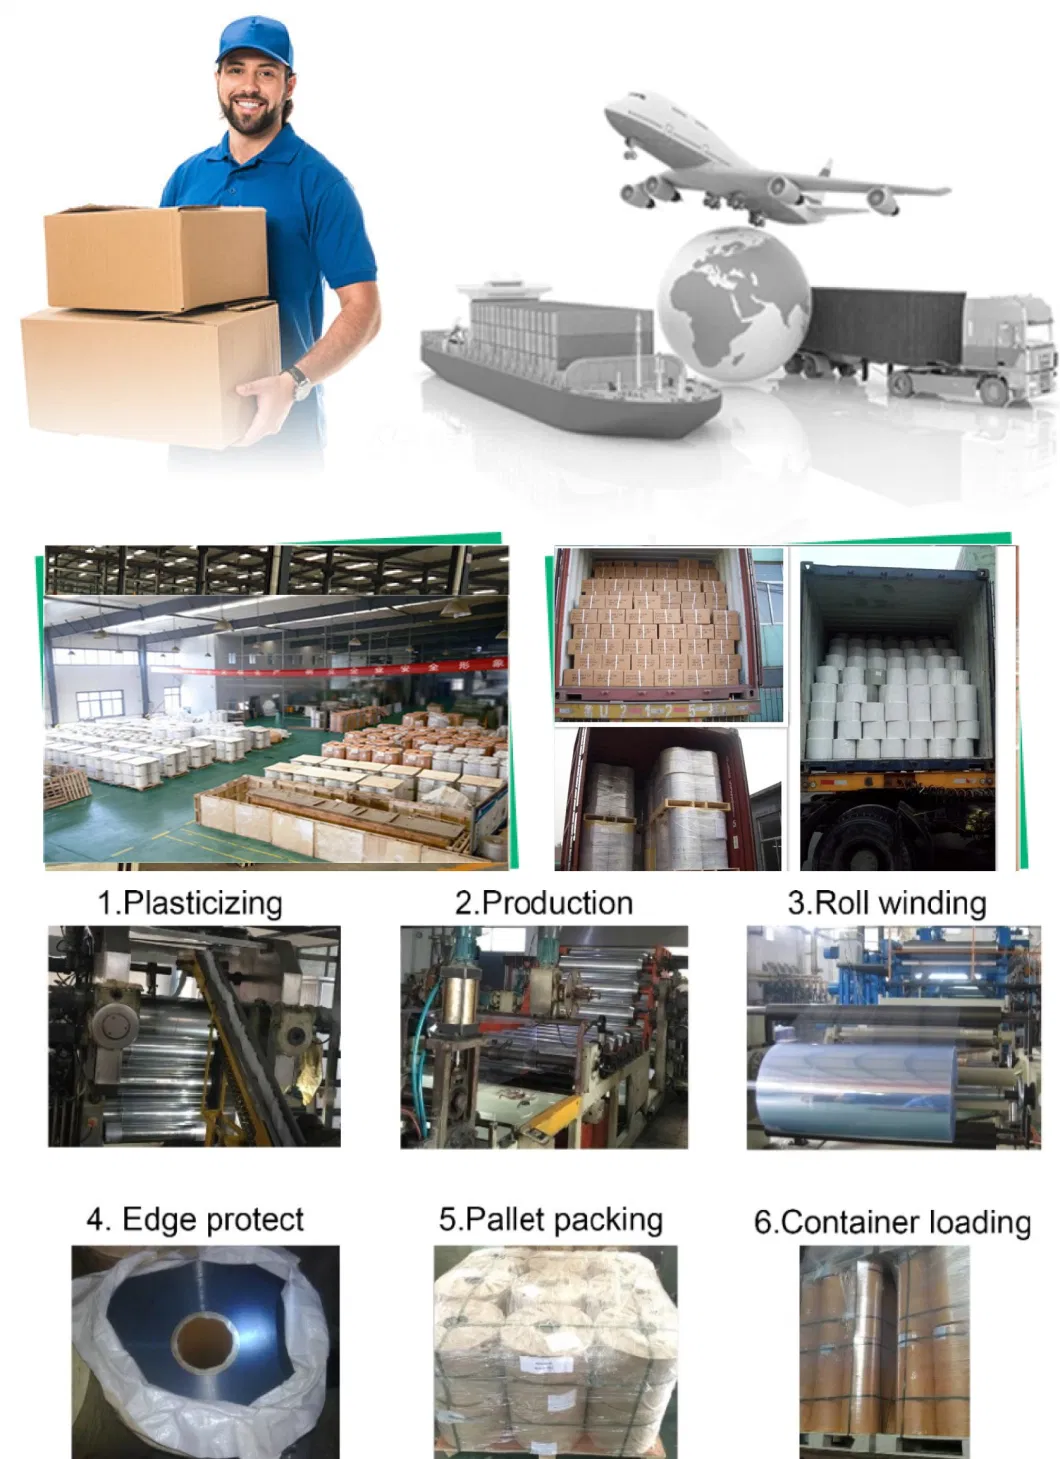 Coated Conductive PS PP Sheet &amp; Roll, Which Is Mainly Applied for The Thermoformed Packaging of Downstream Markets in Electronicsfood Trayshardware &amp; Tool